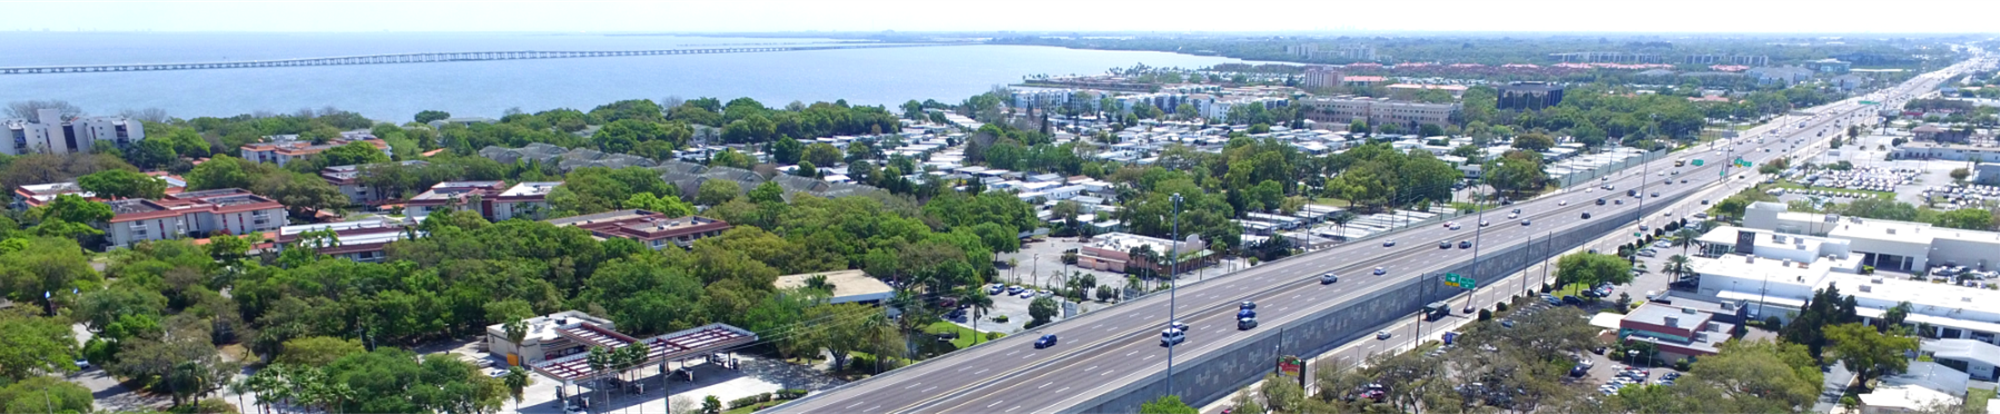 Clearwater Economic Development site selection, expansion and relocation